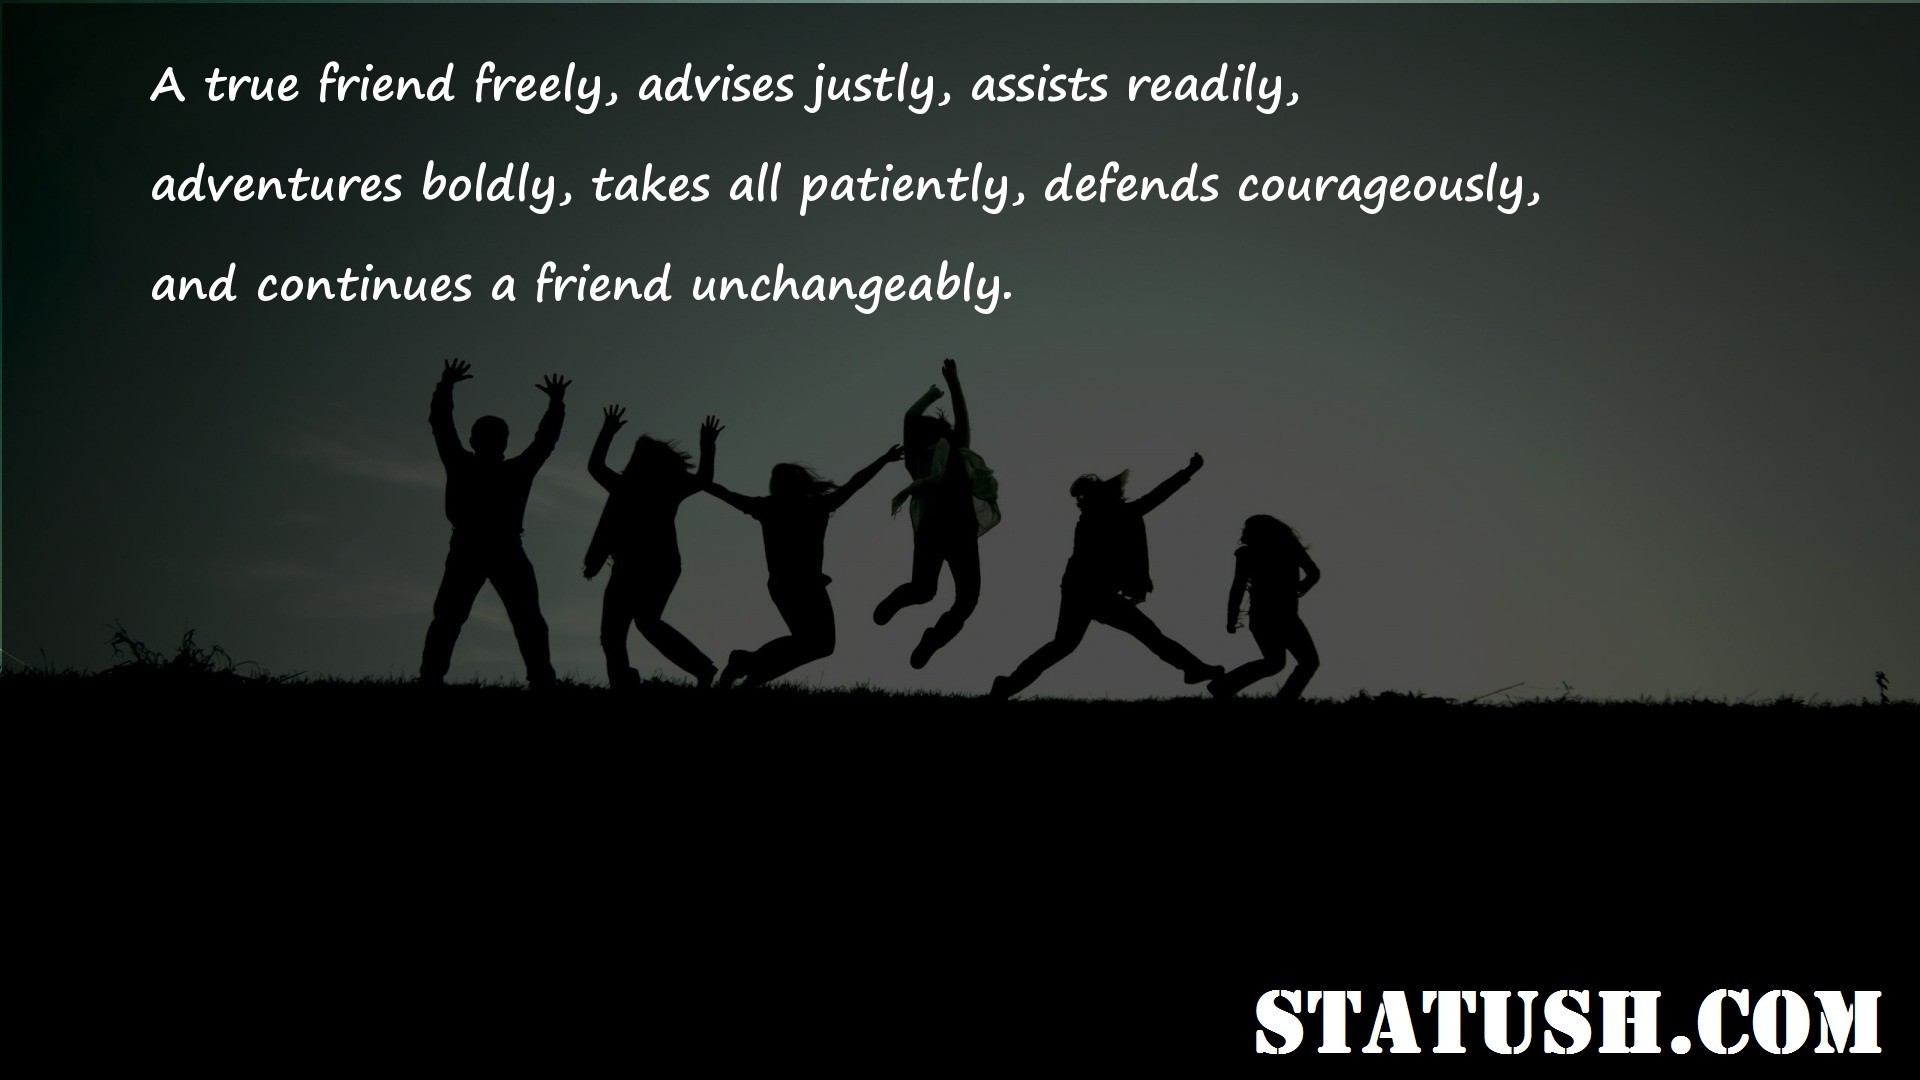 A true friend freely advises justly assists readily - Friendship Quotes at statush.com